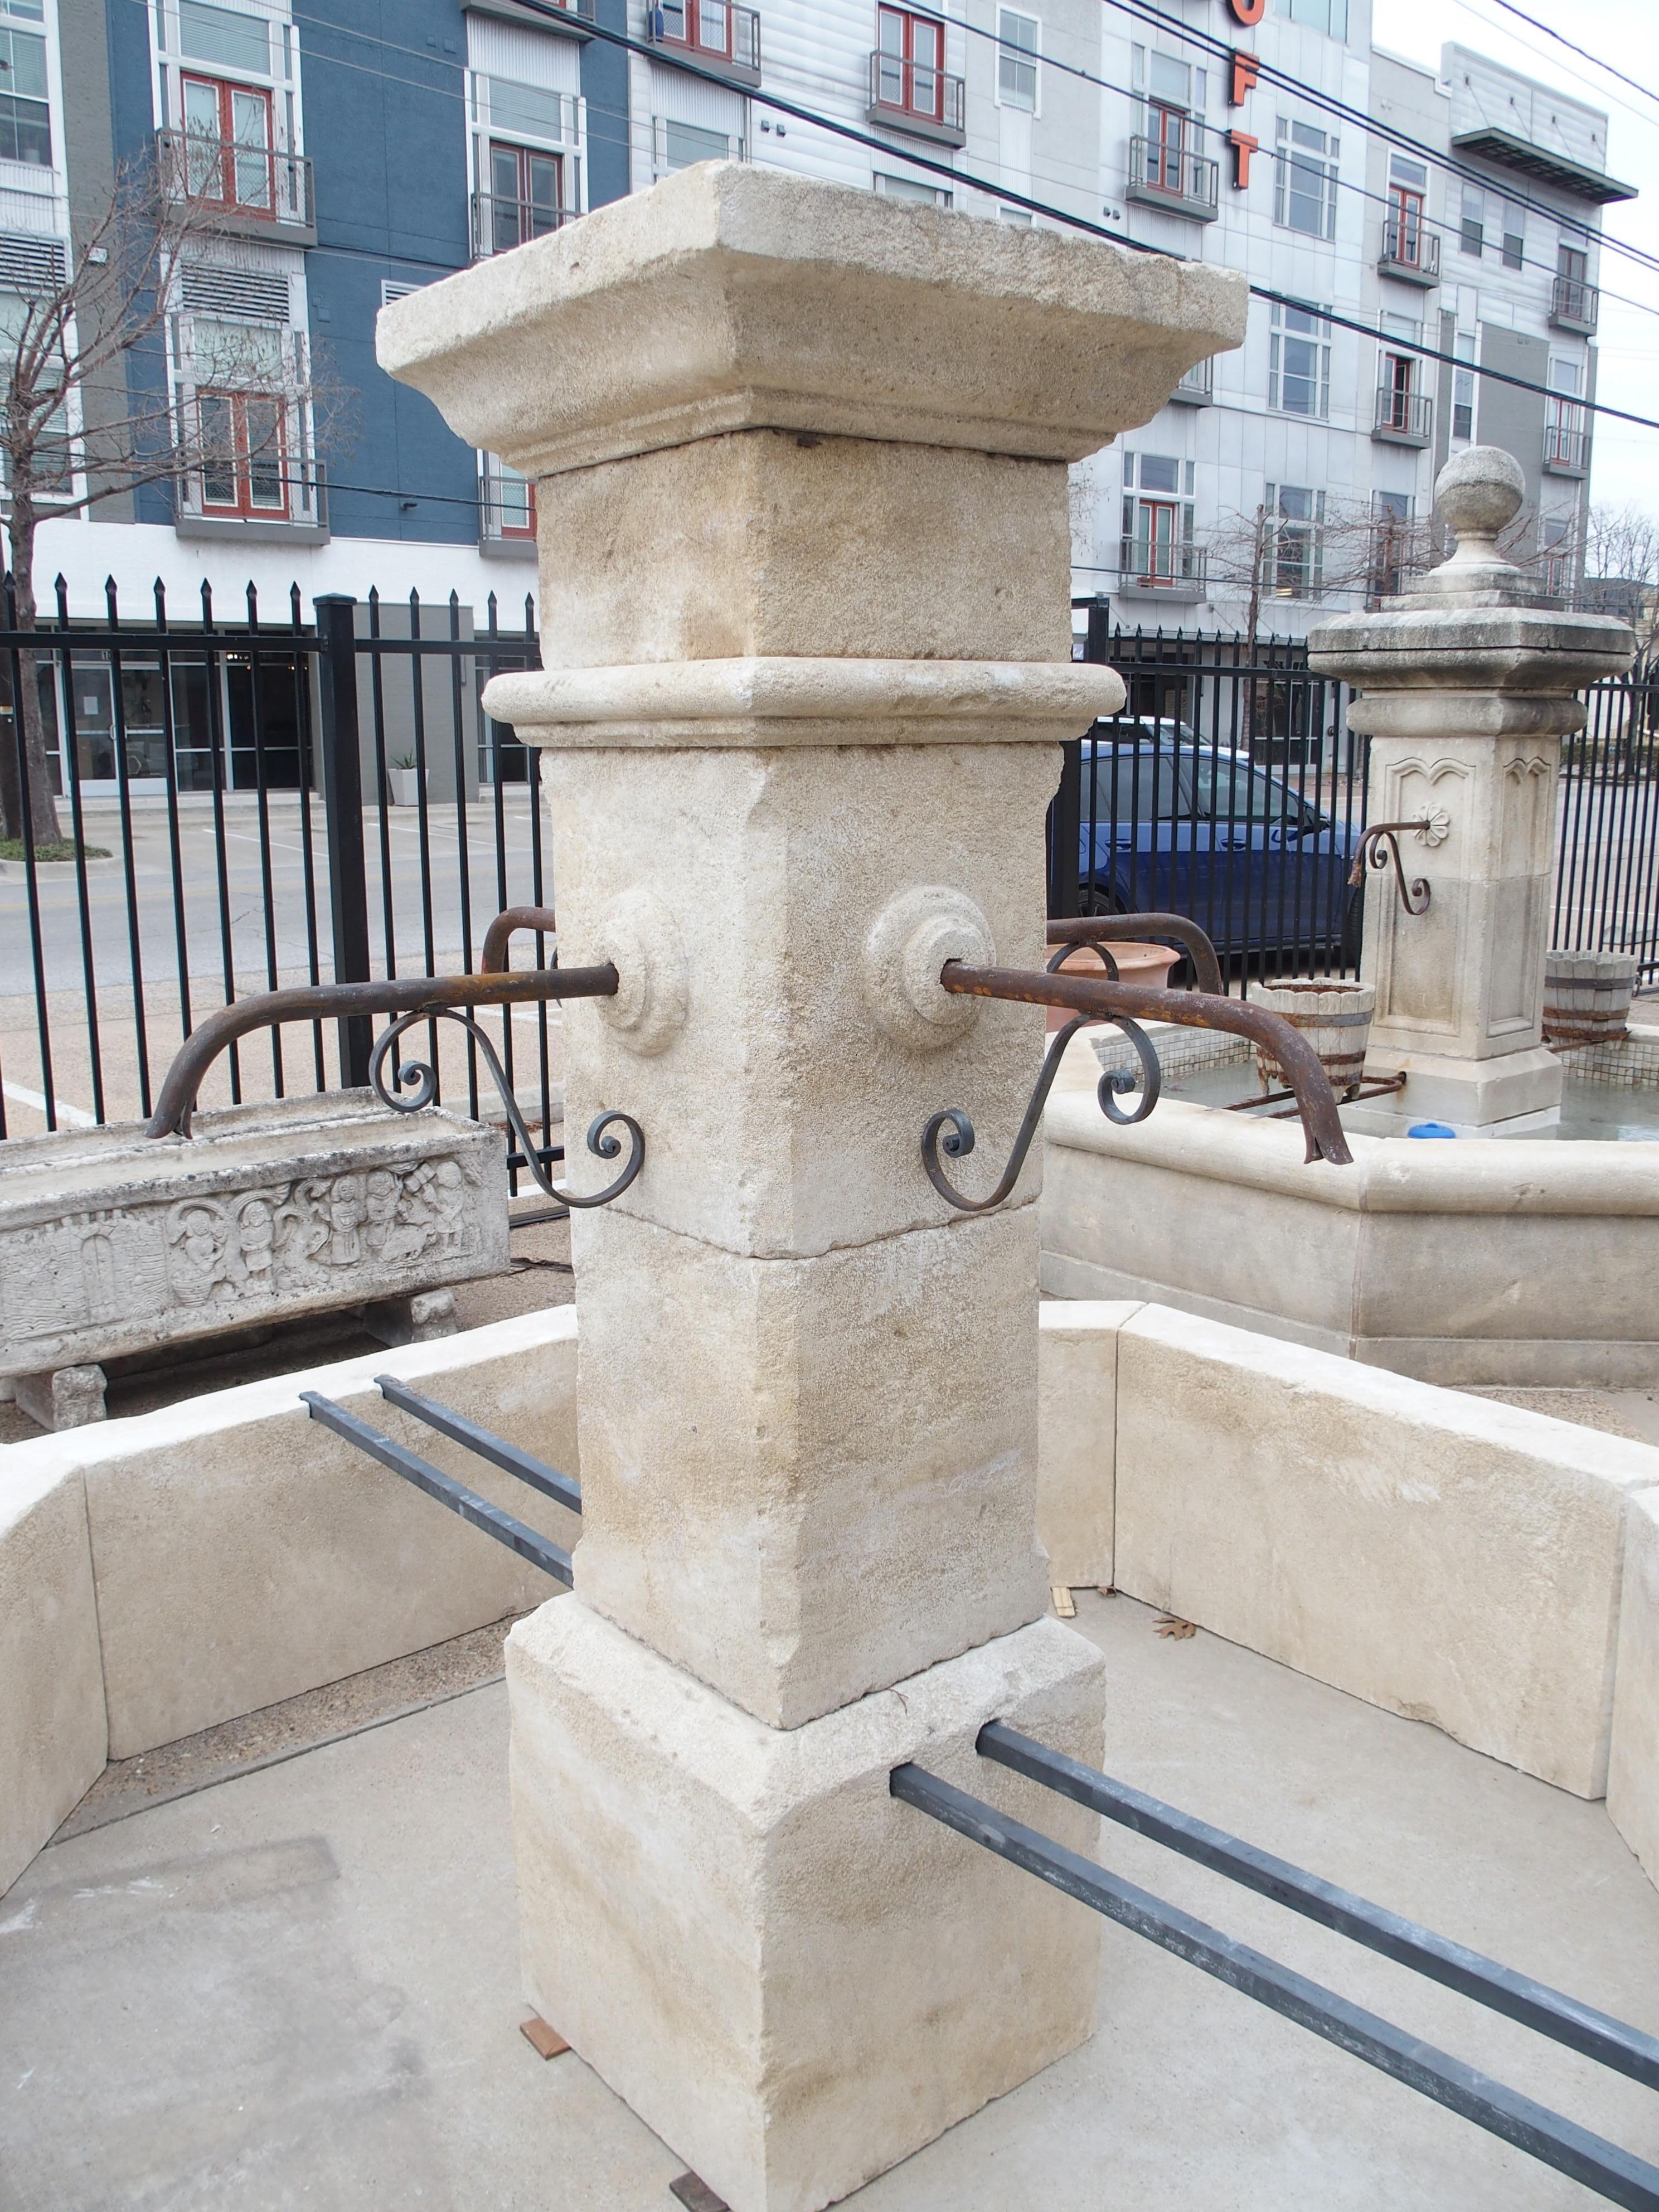 Hand-carved in Provence, France, this large center village fountain is comprised of 14 pieces of Estaillade limestone. Each stone has a cream finish with white and gray accents, expertly added by French artisans using a centuries-old technique.

The